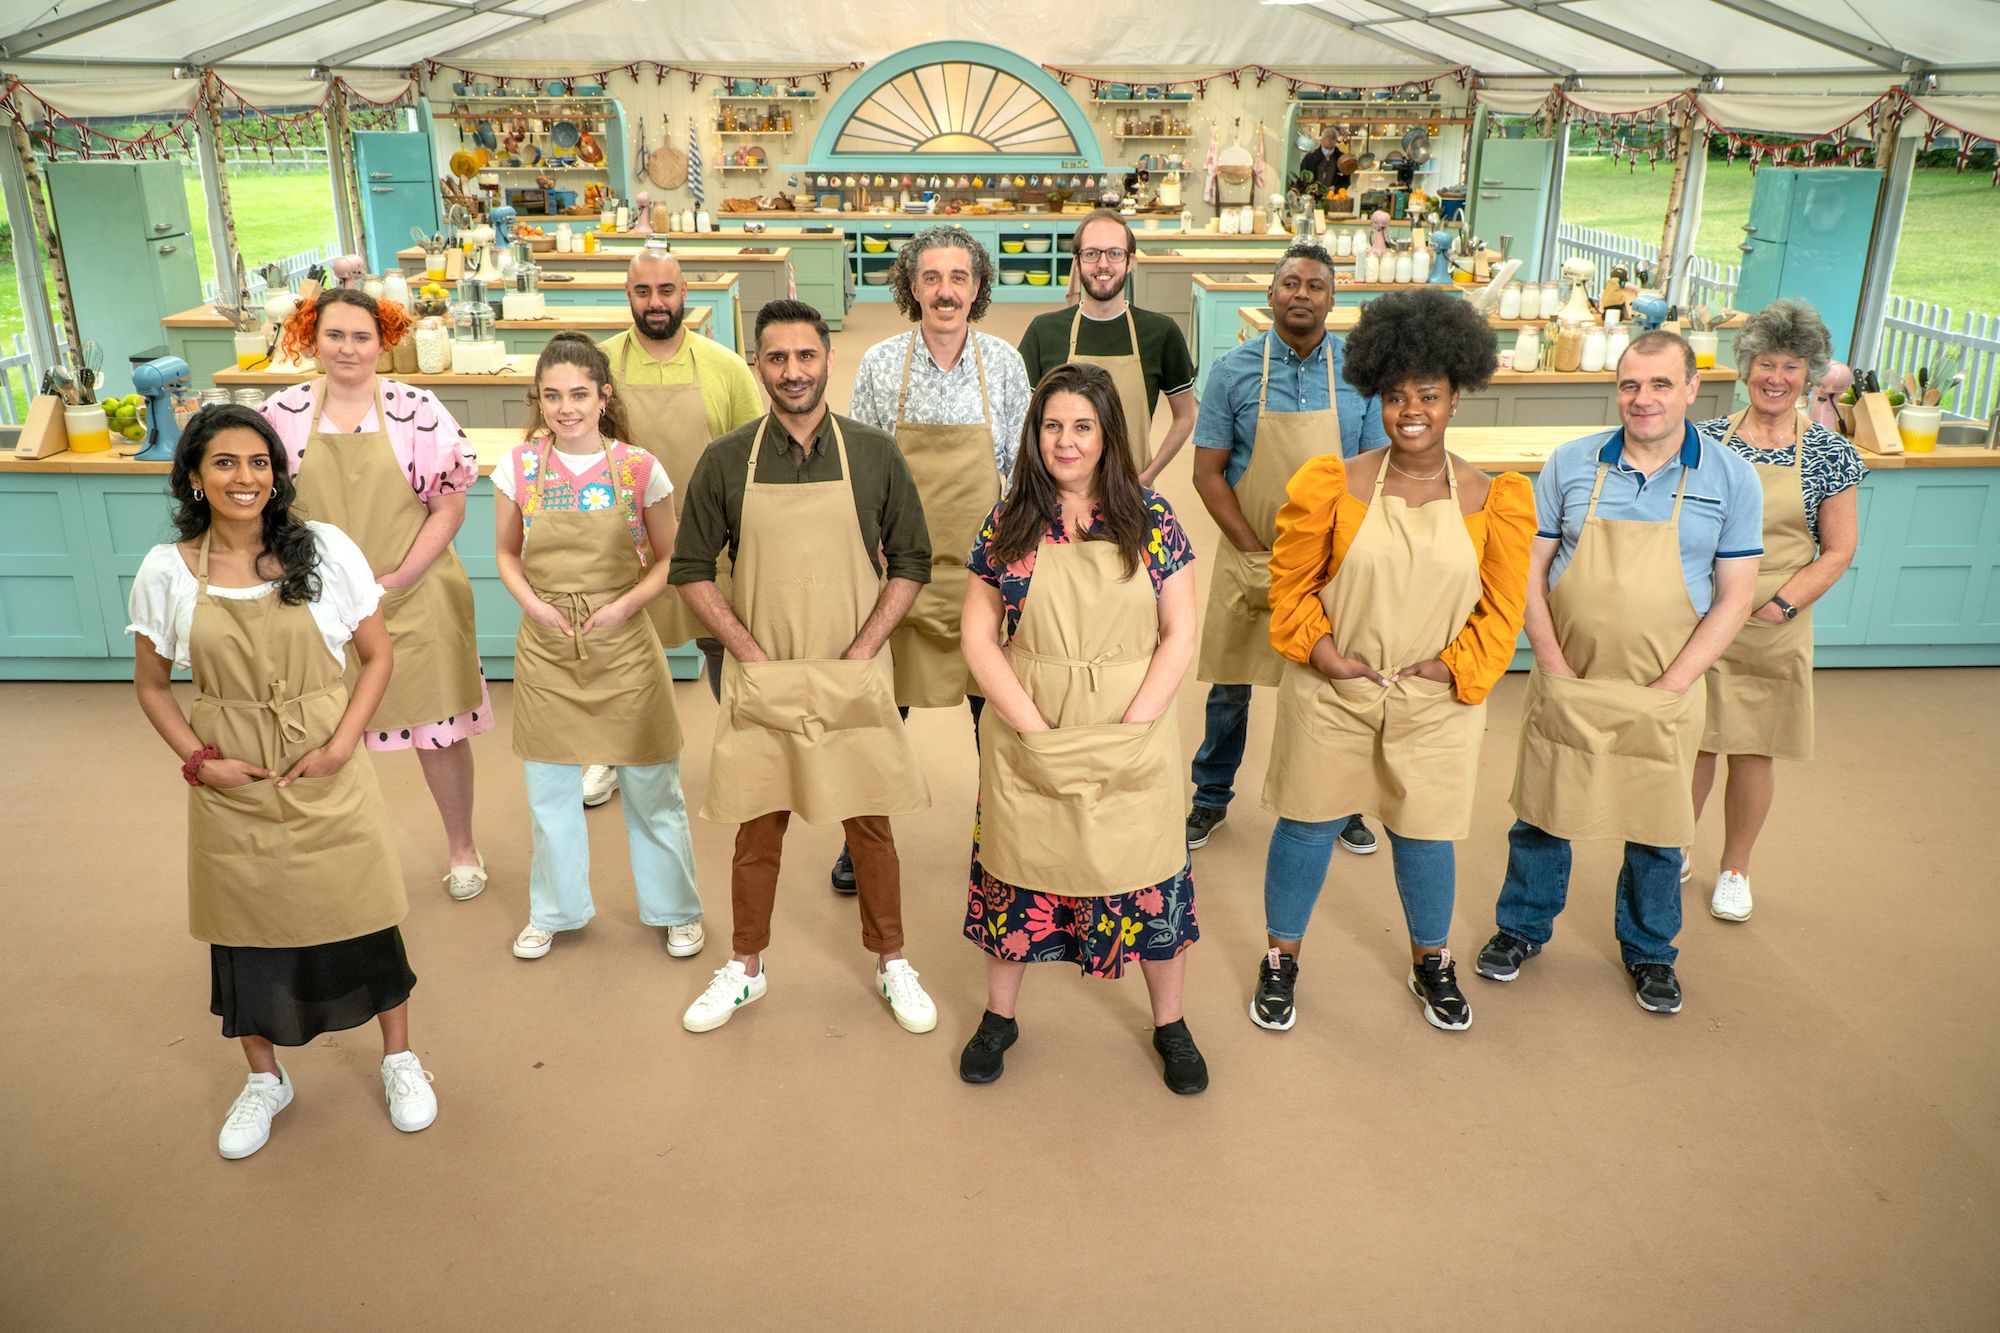 The Great British Bake Off Season 4 Release Date, Cast, Trailer and